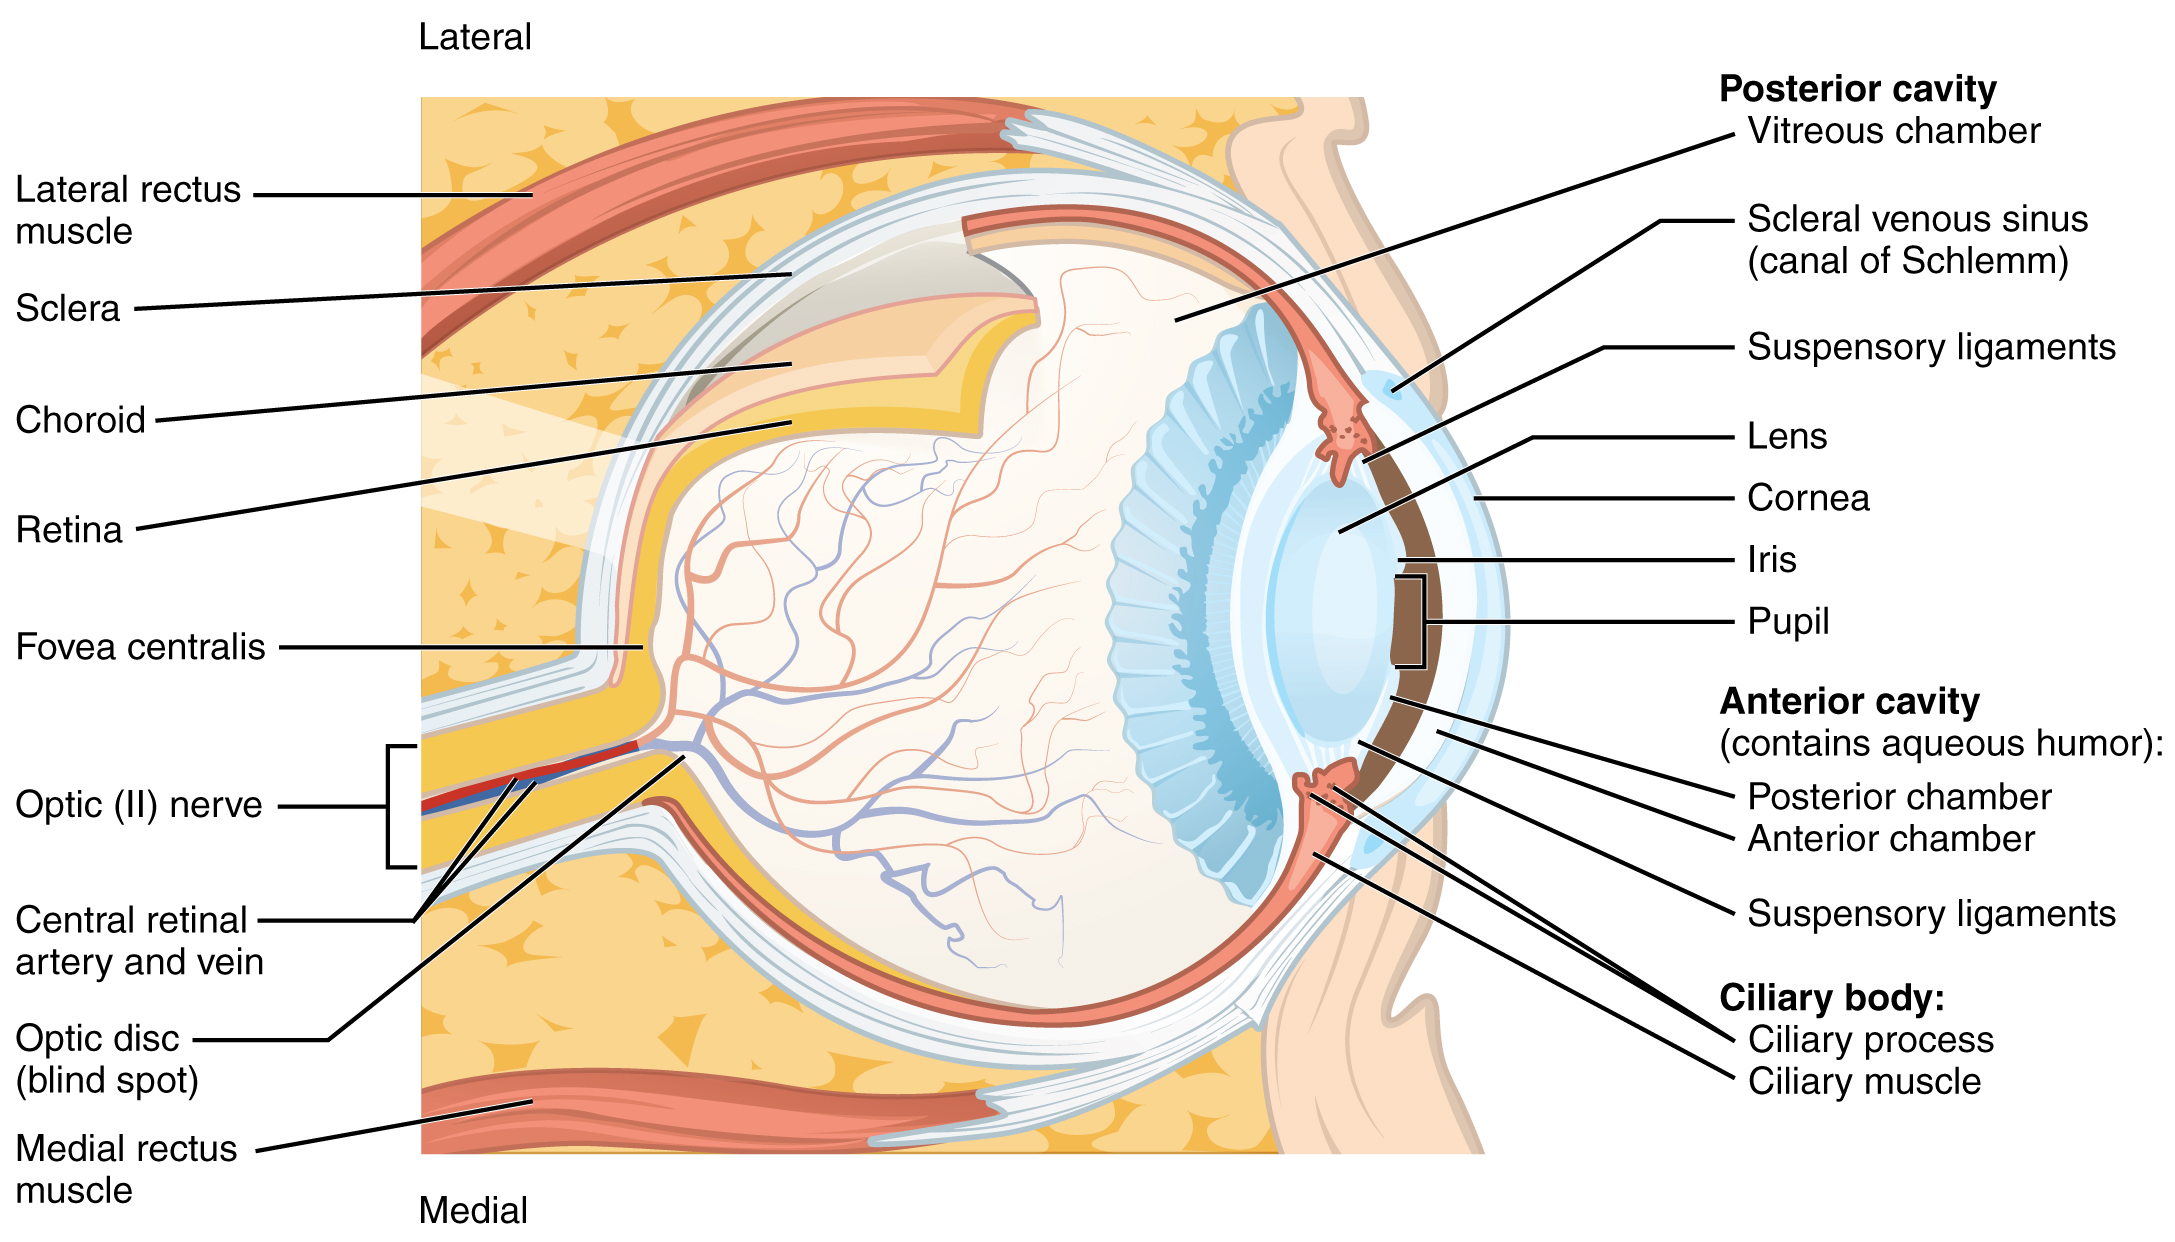 This diagram shows a lateral and medial view of the eye ball. The major parts are labelled. Labels read (from top, clockwise): posterior cavity (vitreous chamber, scleral venous sinus (canal of Schlemm), suspensory ligaments, lens, cornea, iris, pupil); anterior cavity (contains aqueous humor, posterior chamber, anterior chamber, suspensory ligaments); Ciliary body (ciliary process and muscle), medial rectus muscle, optic disc (blind spot), central retinal artery and vein, foveal centralis, retina, choroid, sclera, lateral rectus muscle.